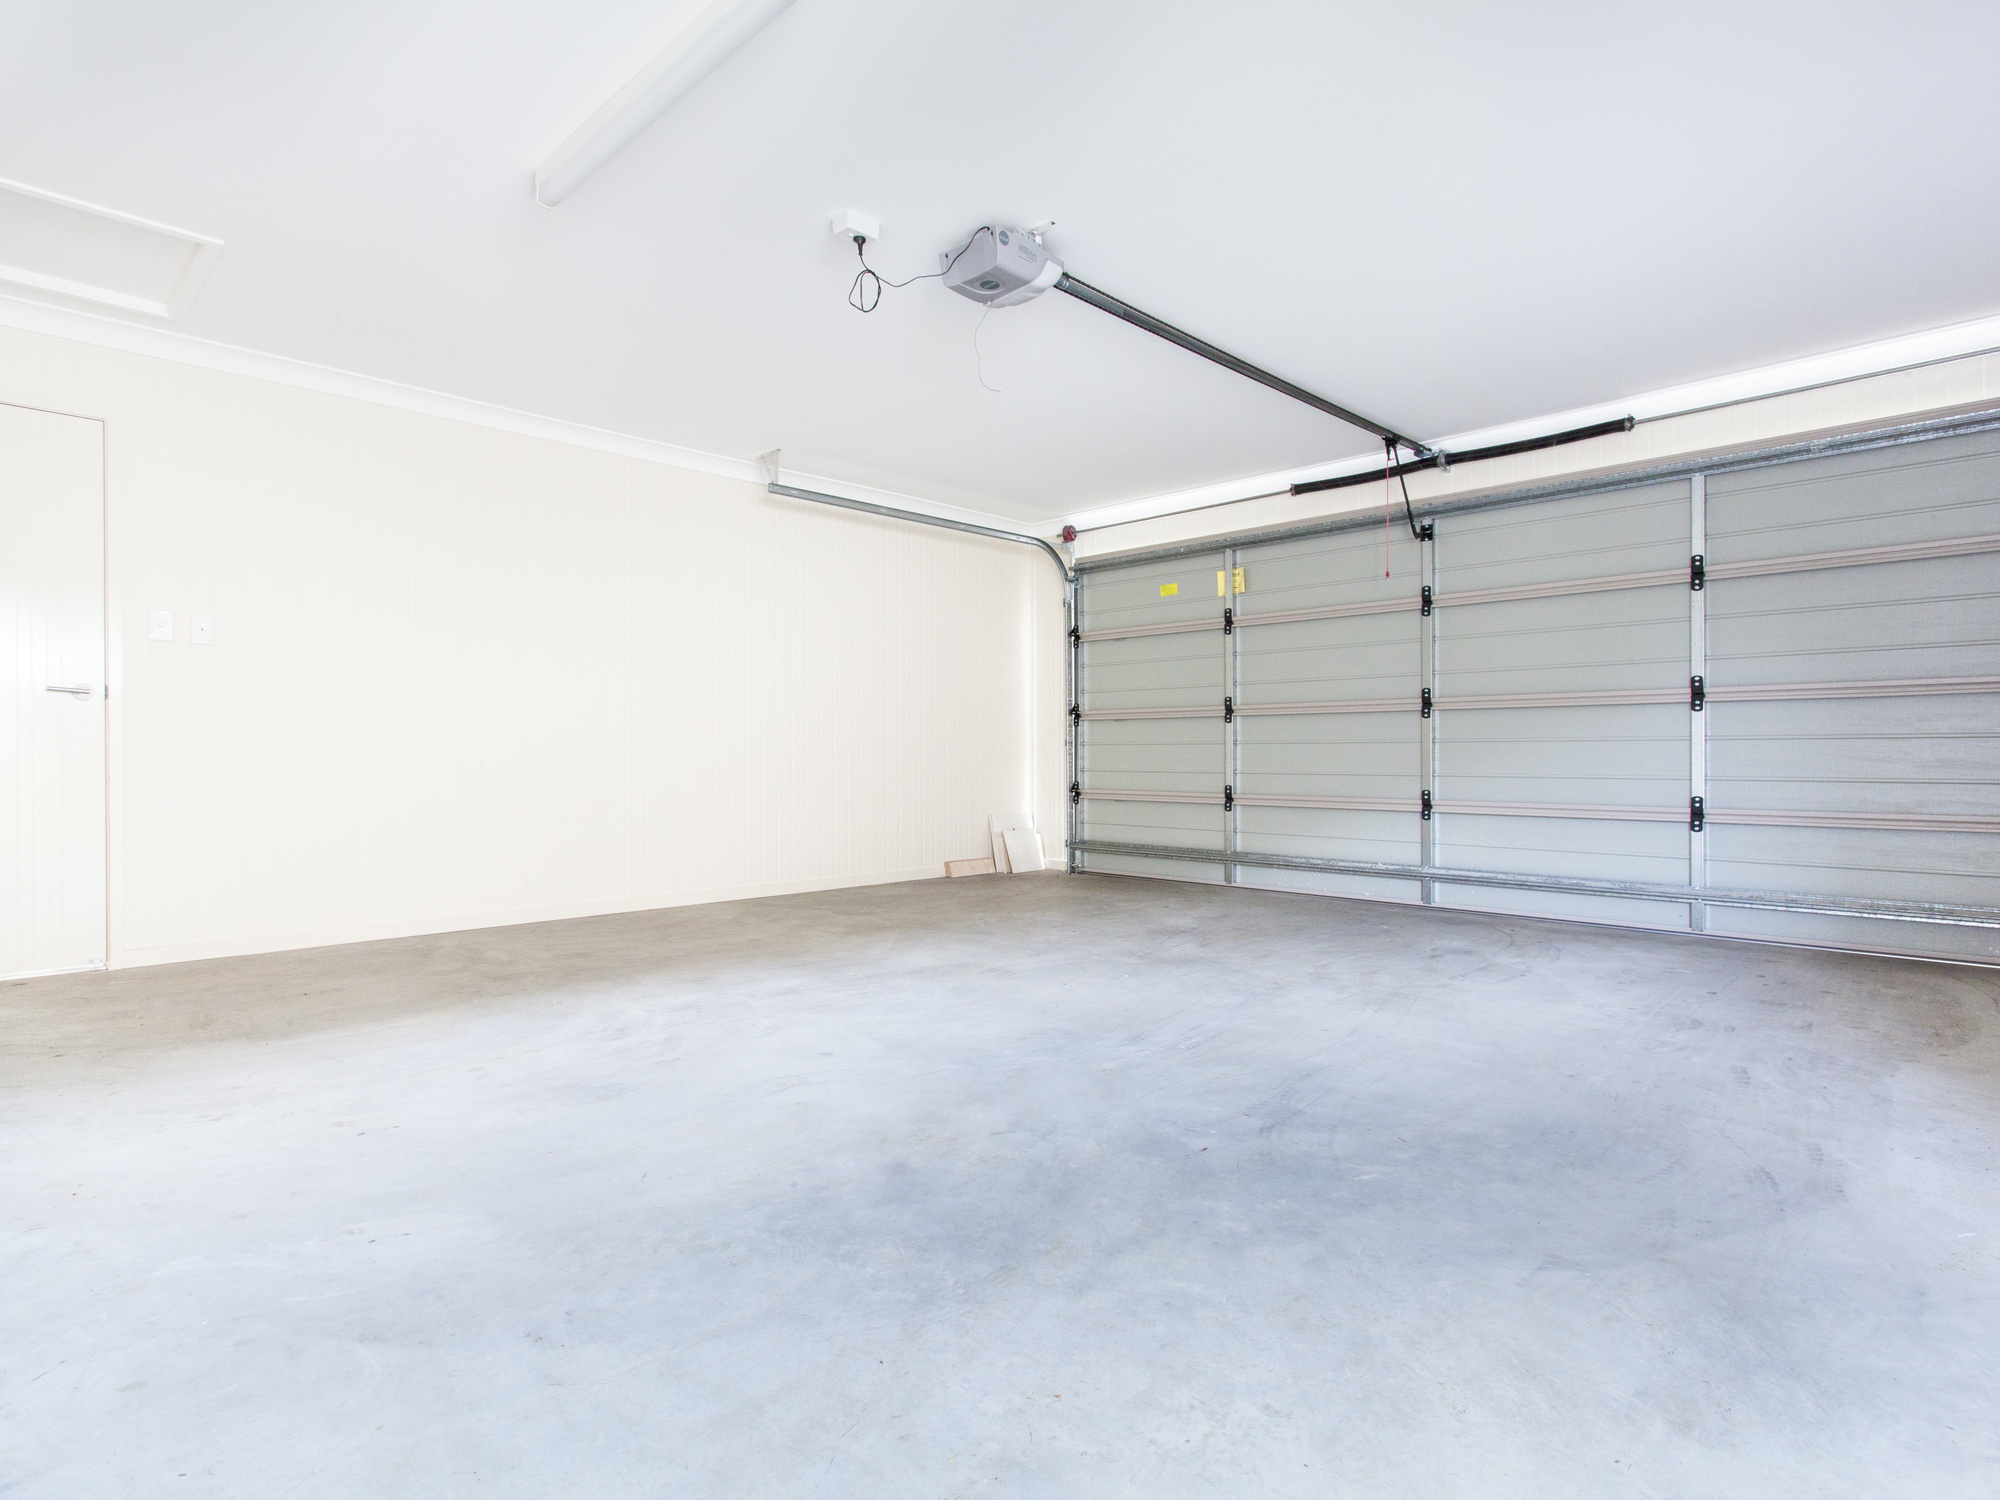 Are you wondering which type of flooring is right for your garage? Click here for the ultimate guide to choosing your garage flooring.